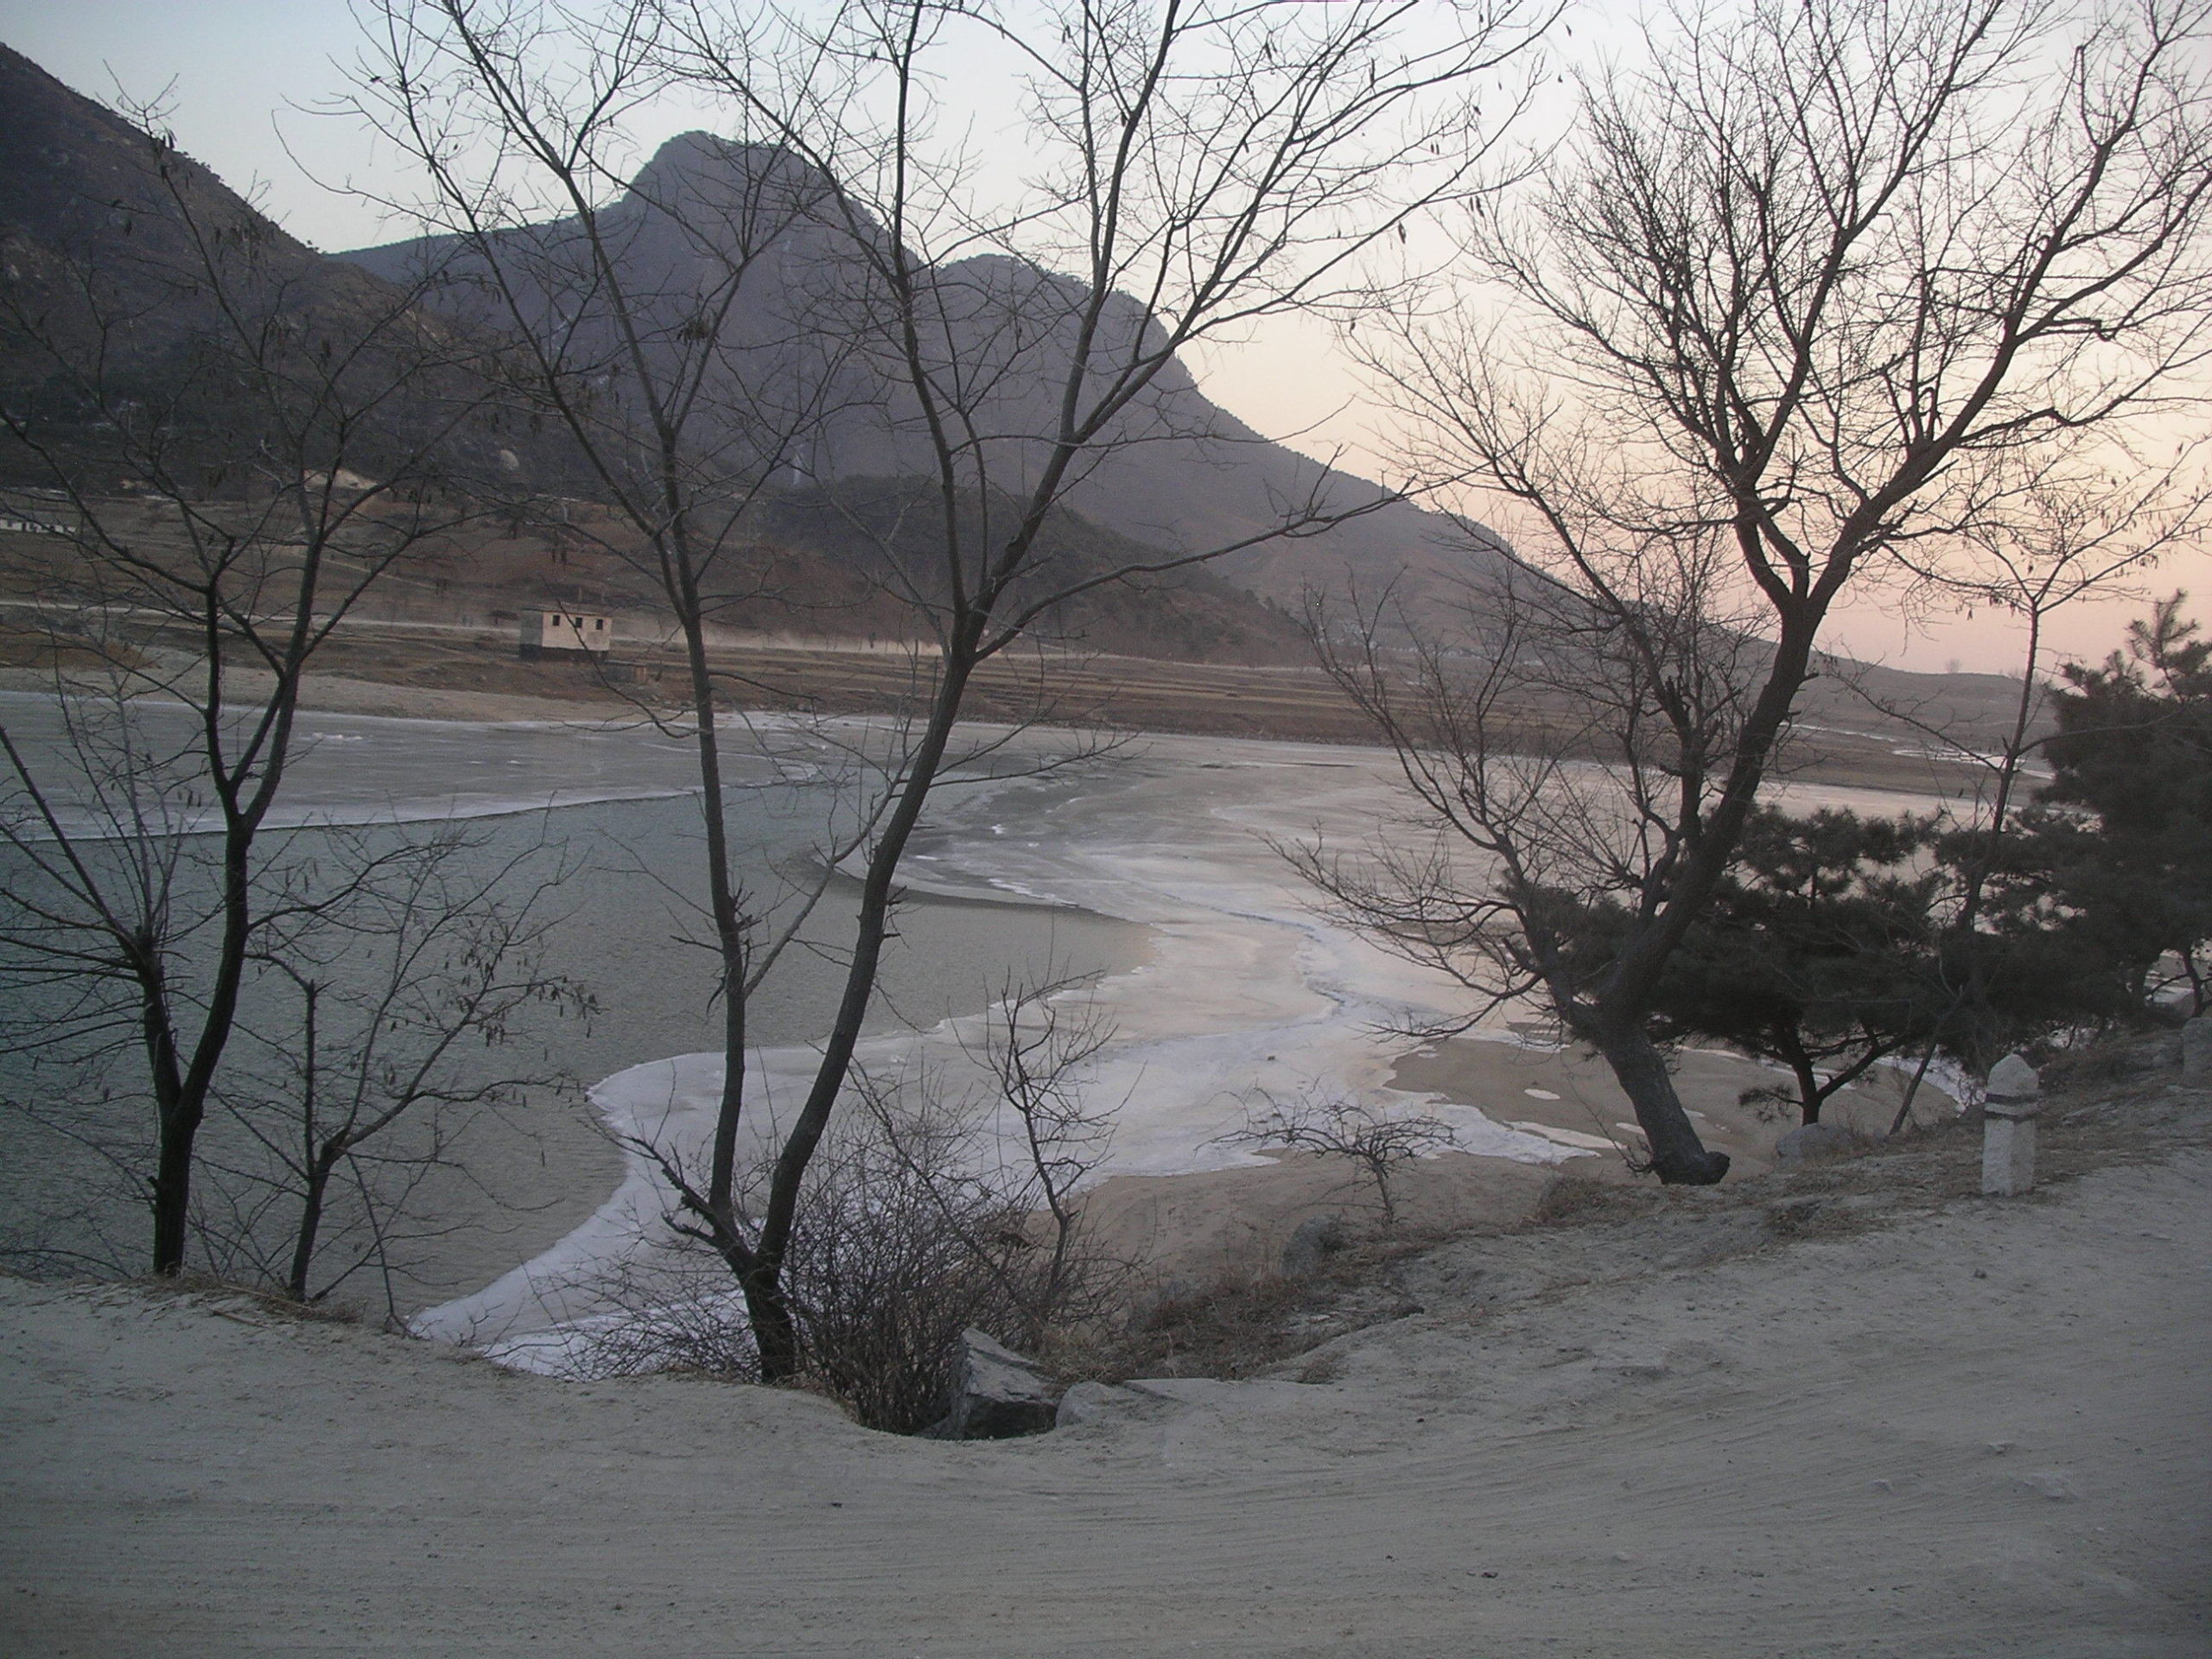 A dirt bank and a river with curved river bed with hills in the back